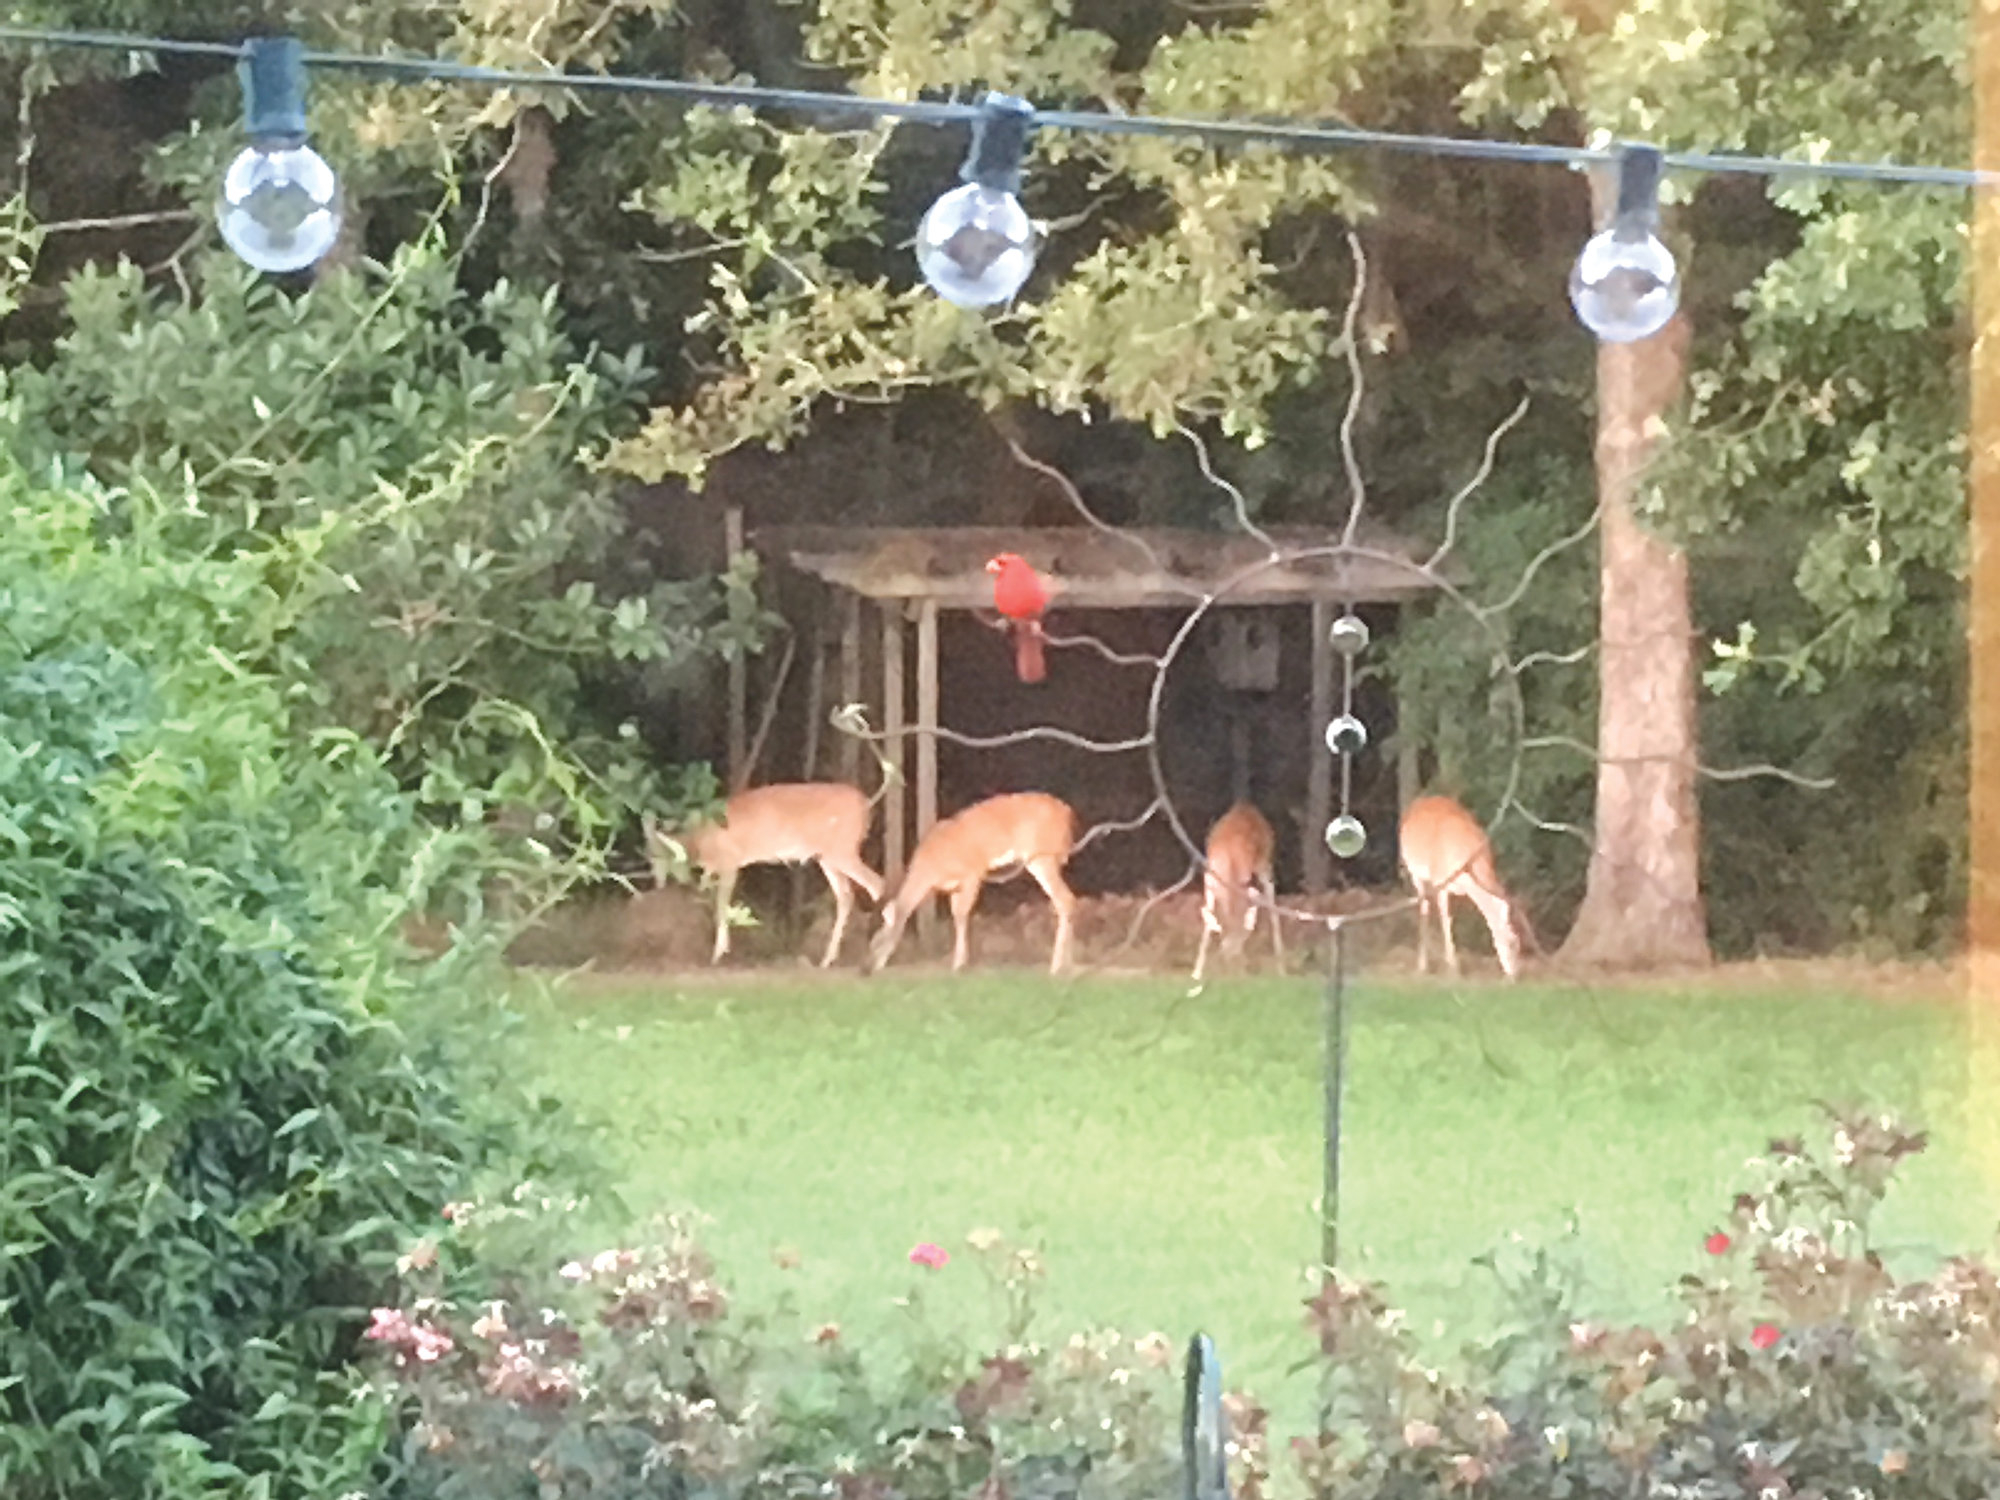 Dan Geddings took this picture from his kitchen window.